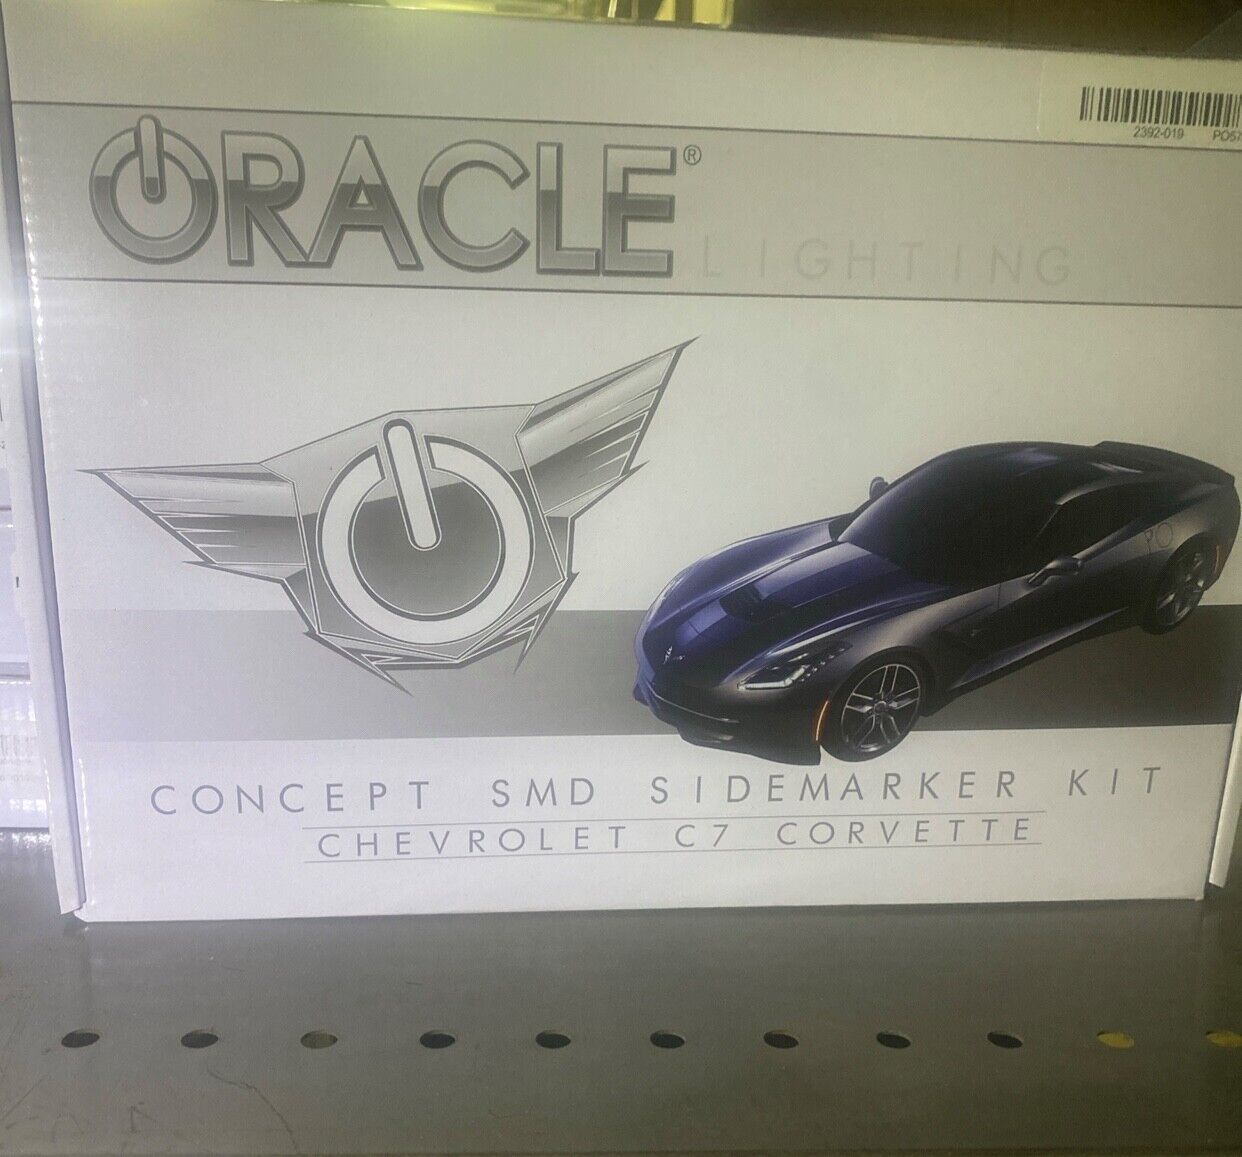 For Oracle Chevrolet Corvette C7 Concept Sidemarker Set - Ghosted - Crystal R...